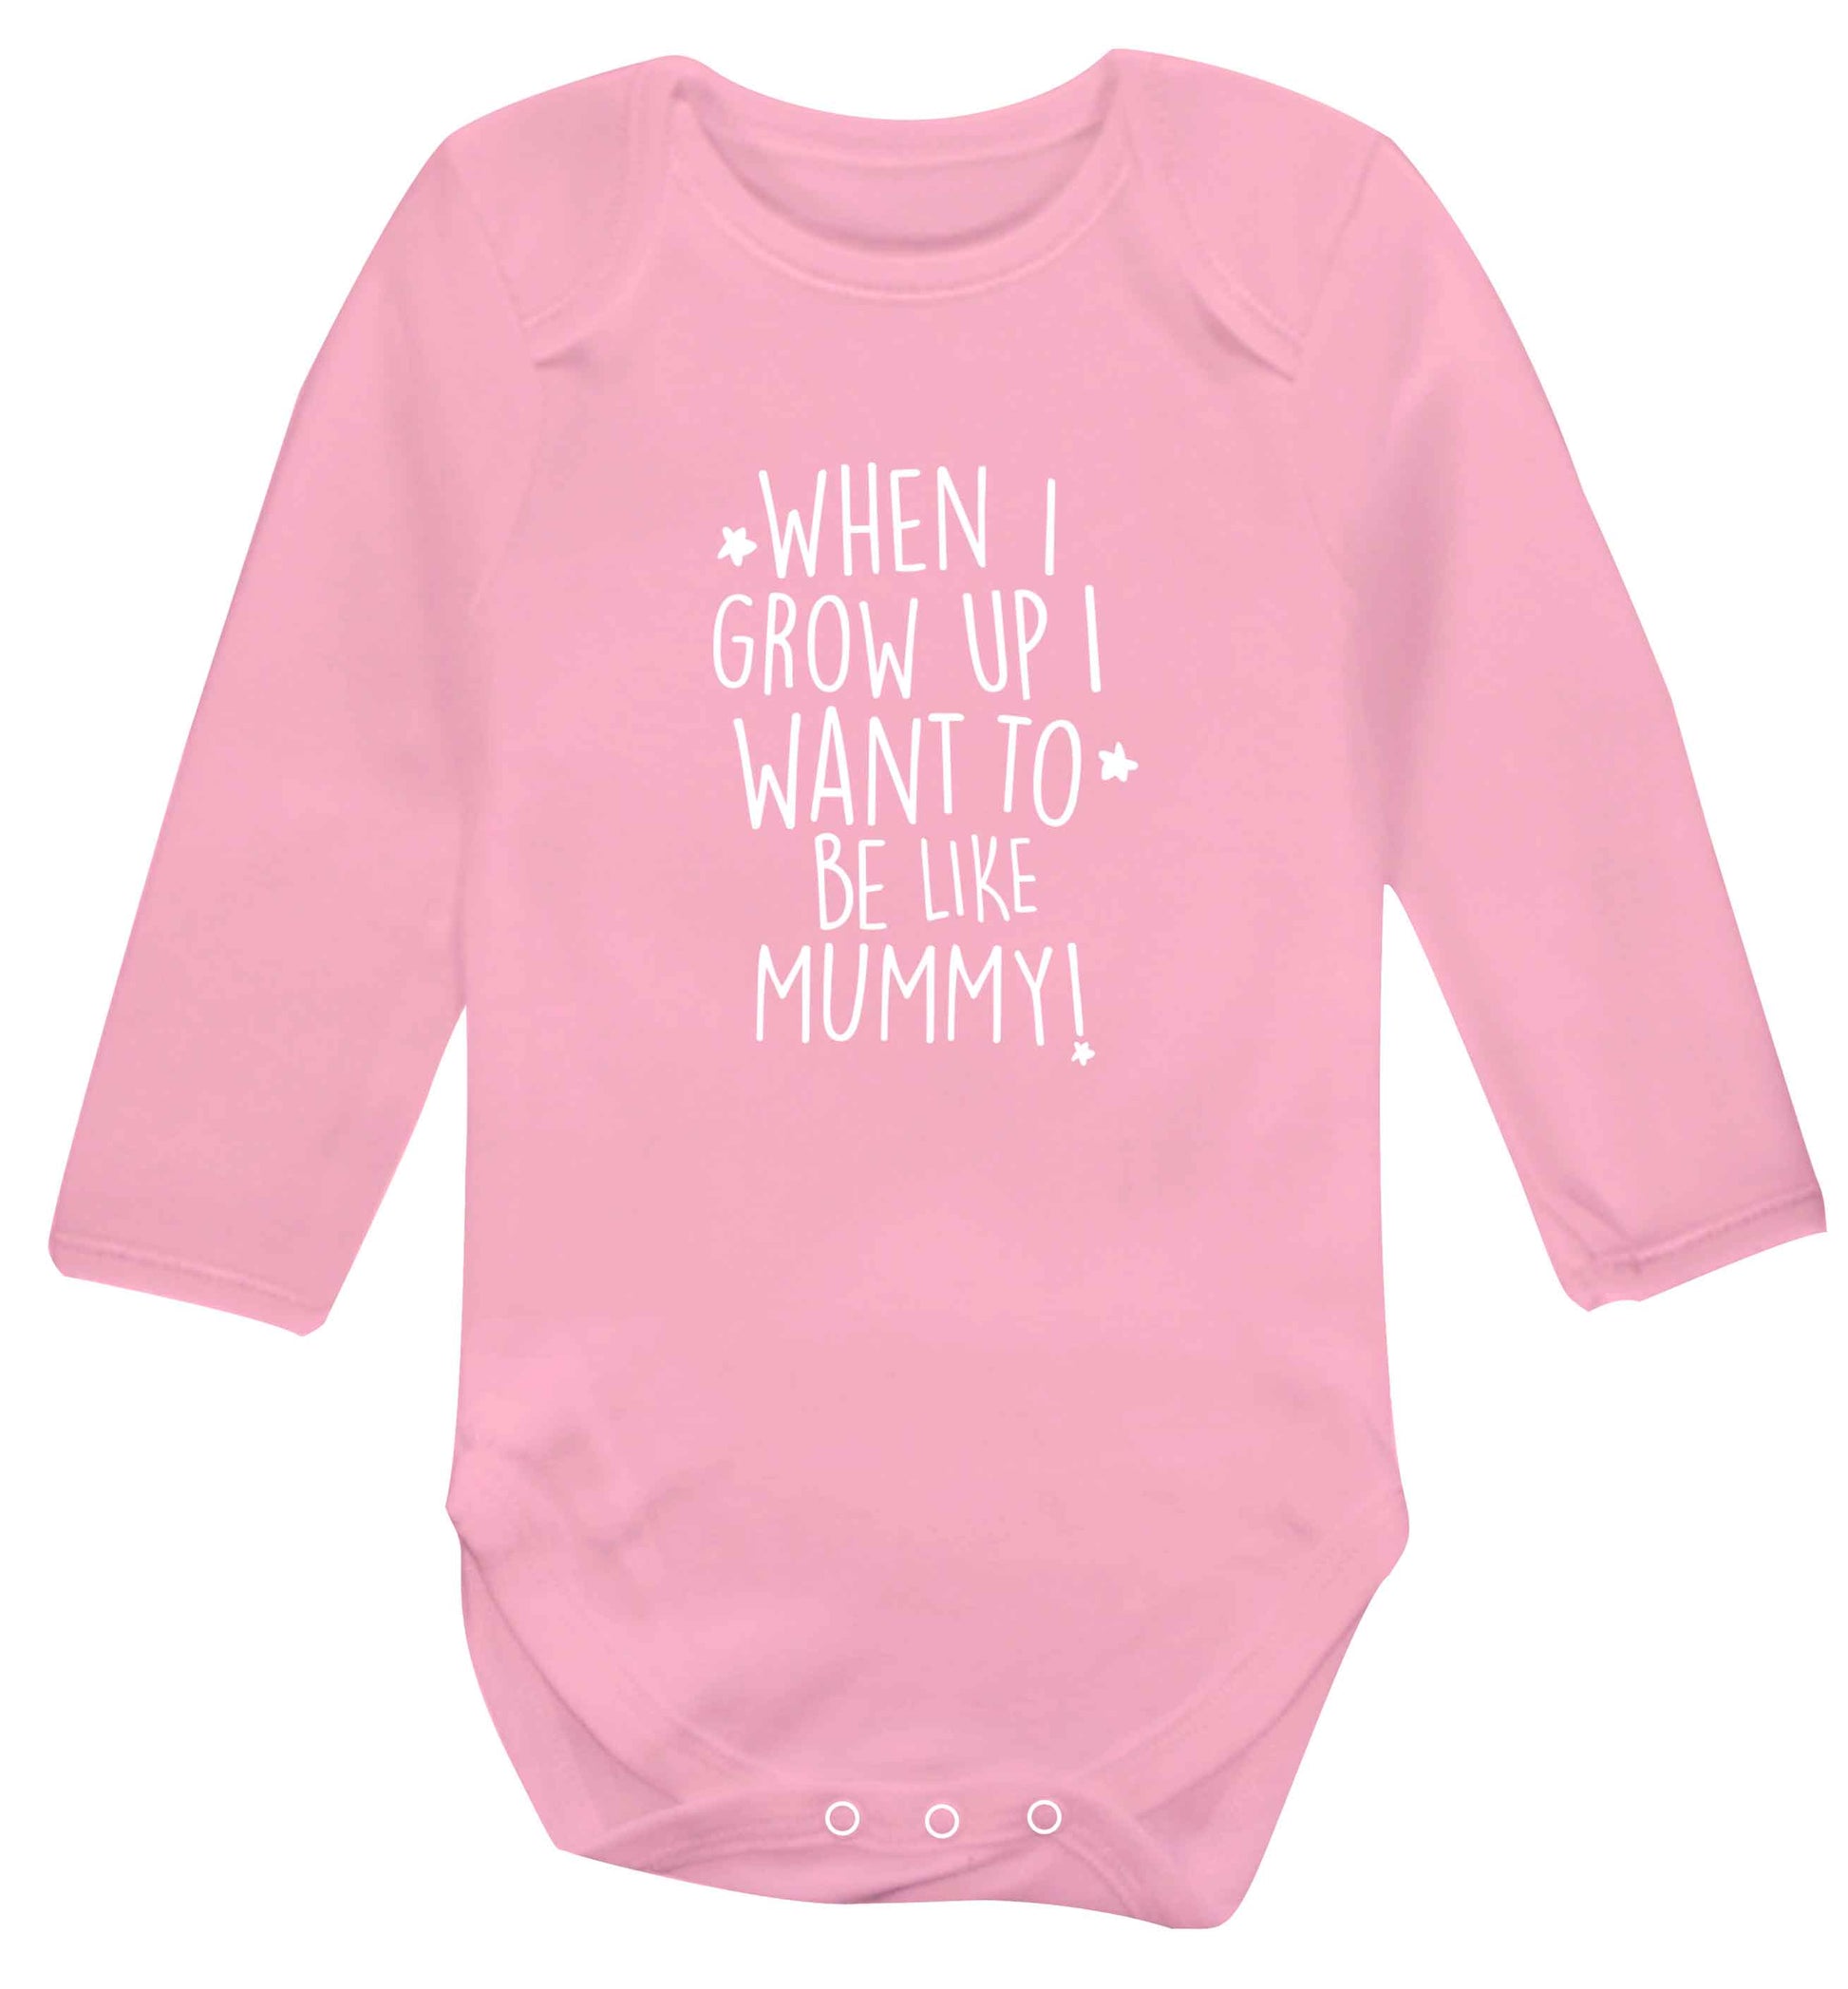 When I grow up I want to be like my mummy baby vest long sleeved pale pink 6-12 months